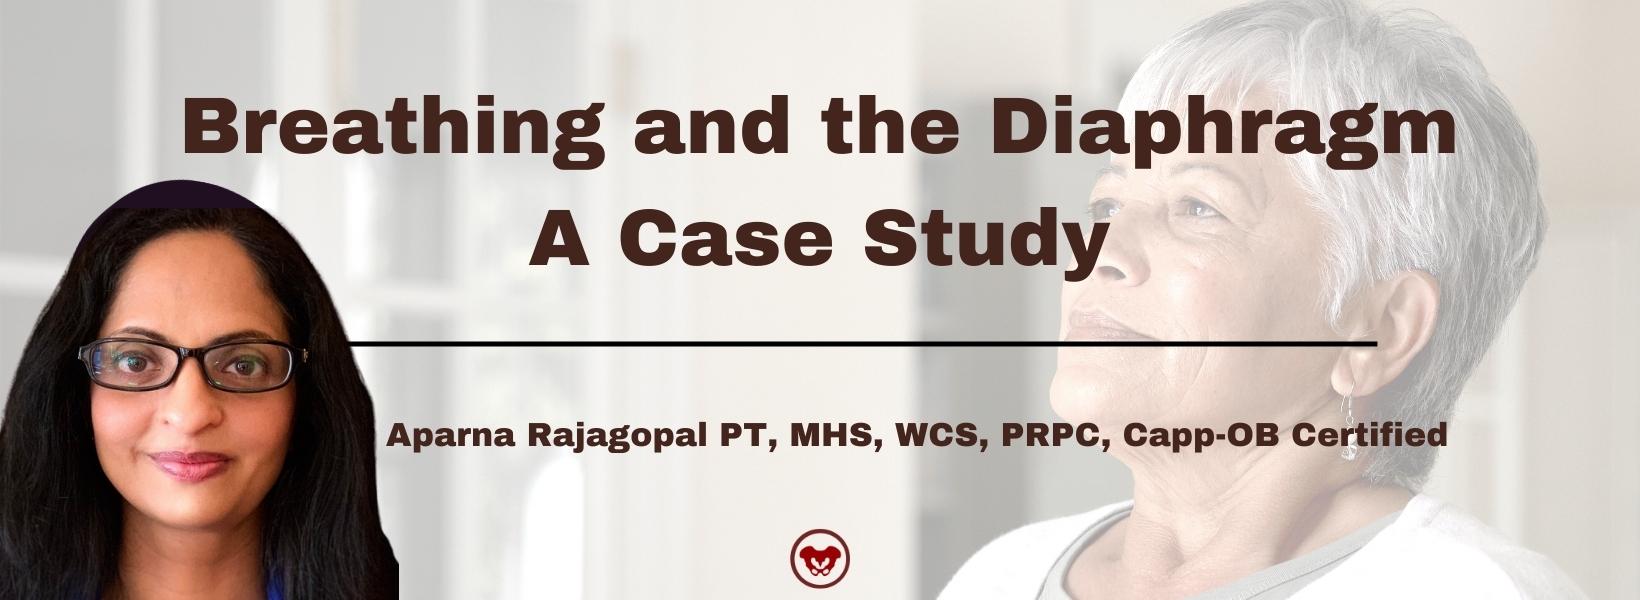 Breathing and the Diaphragm - A Case Study